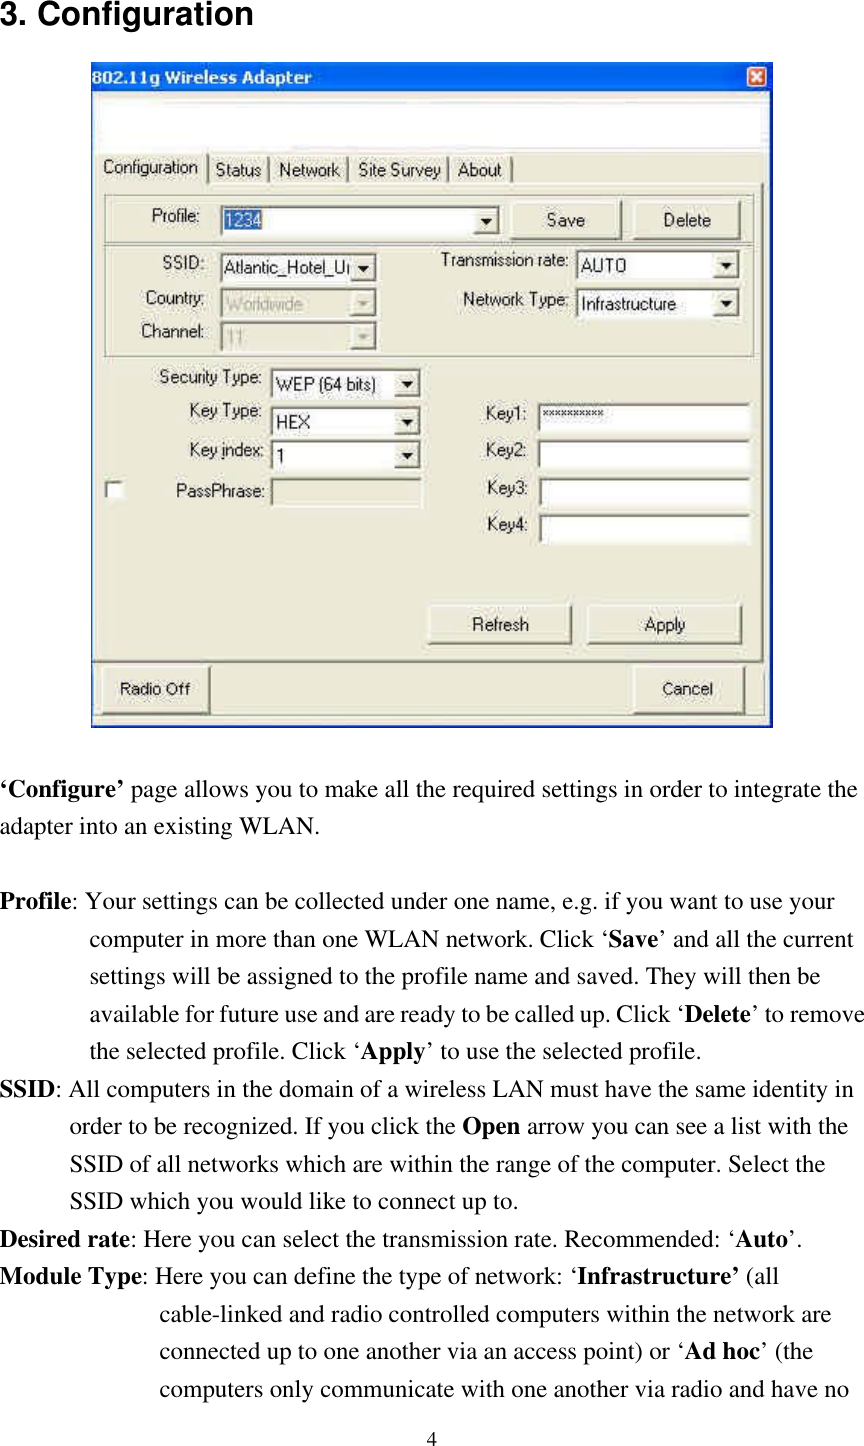 4 3. Configuration   ‘Configure’ page allows you to make all the required settings in order to integrate the adapter into an existing WLAN.  Profile: Your settings can be collected under one name, e.g. if you want to use your           computer in more than one WLAN network. Click ‘Save’ and all the current           settings will be assigned to the profile name and saved. They will then be           available for future use and are ready to be called up. Click ‘Delete’ to remove           the selected profile. Click ‘Apply’ to use the selected profile. SSID: All computers in the domain of a wireless LAN must have the same identity in         order to be recognized. If you click the Open arrow you can see a list with the          SSID of all networks which are within the range of the computer. Select the         SSID which you would like to connect up to. Desired rate: Here you can select the transmission rate. Recommended: ‘Auto’.  Module Type: Here you can define the type of network: ‘Infrastructure’ (all                  cable-linked and radio controlled computers within the network are                  connected up to one another via an access point) or ‘Ad hoc’  (the                  computers only communicate with one another via radio and have no  